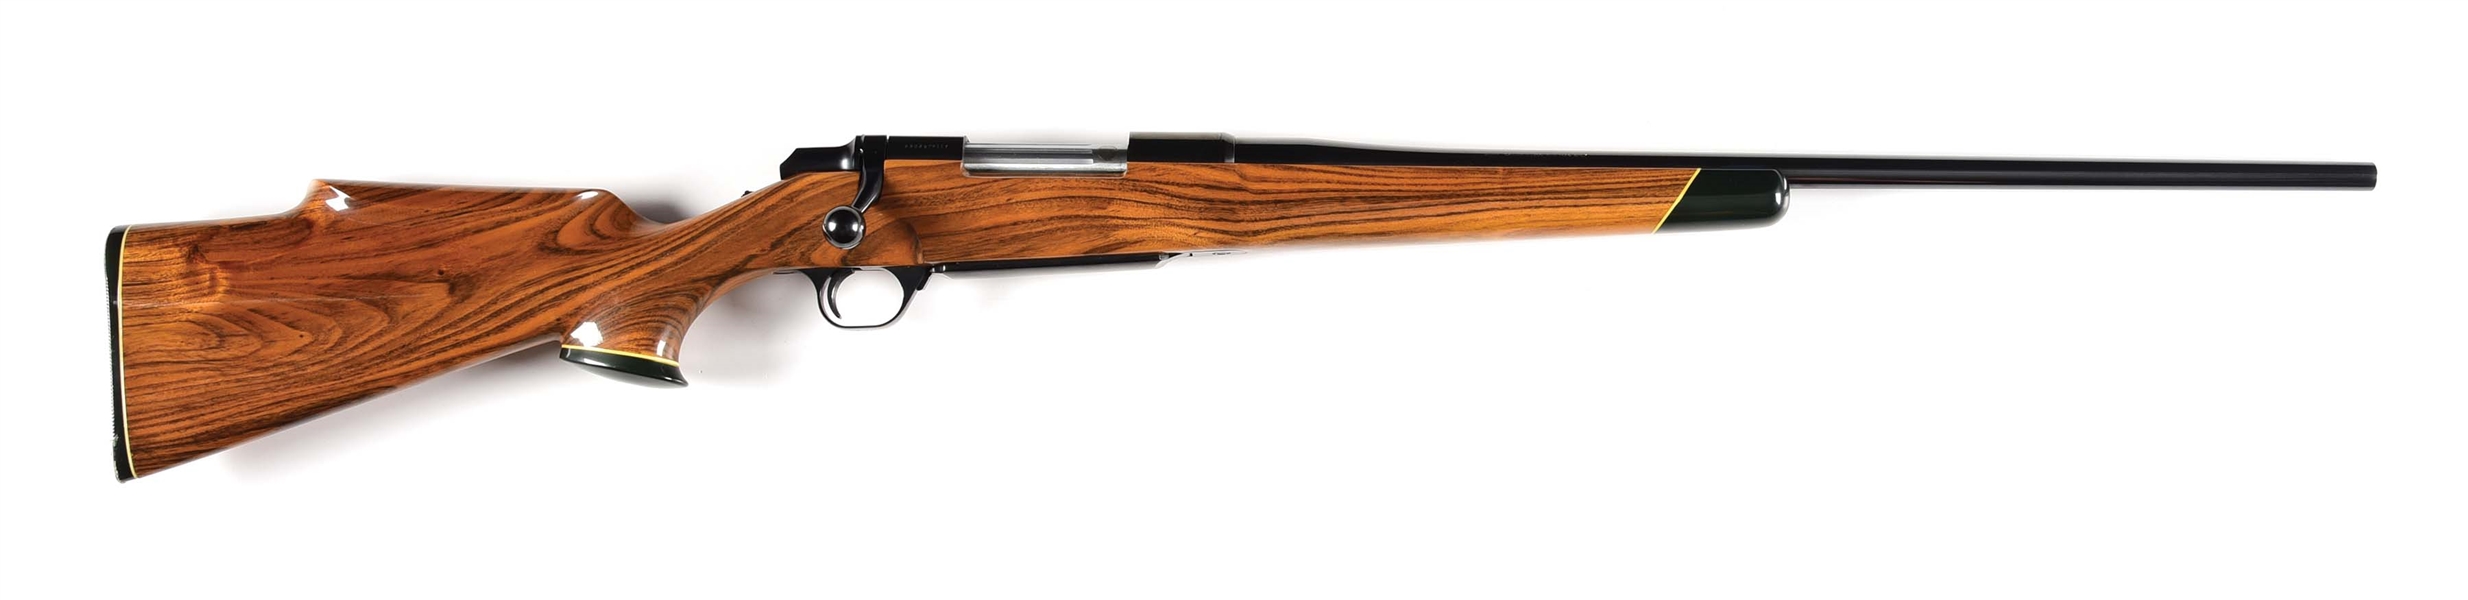 (M) SCREWBEAN MESQUITE STOCKED BROWNING BBR BOLT ACTION RIFLE.